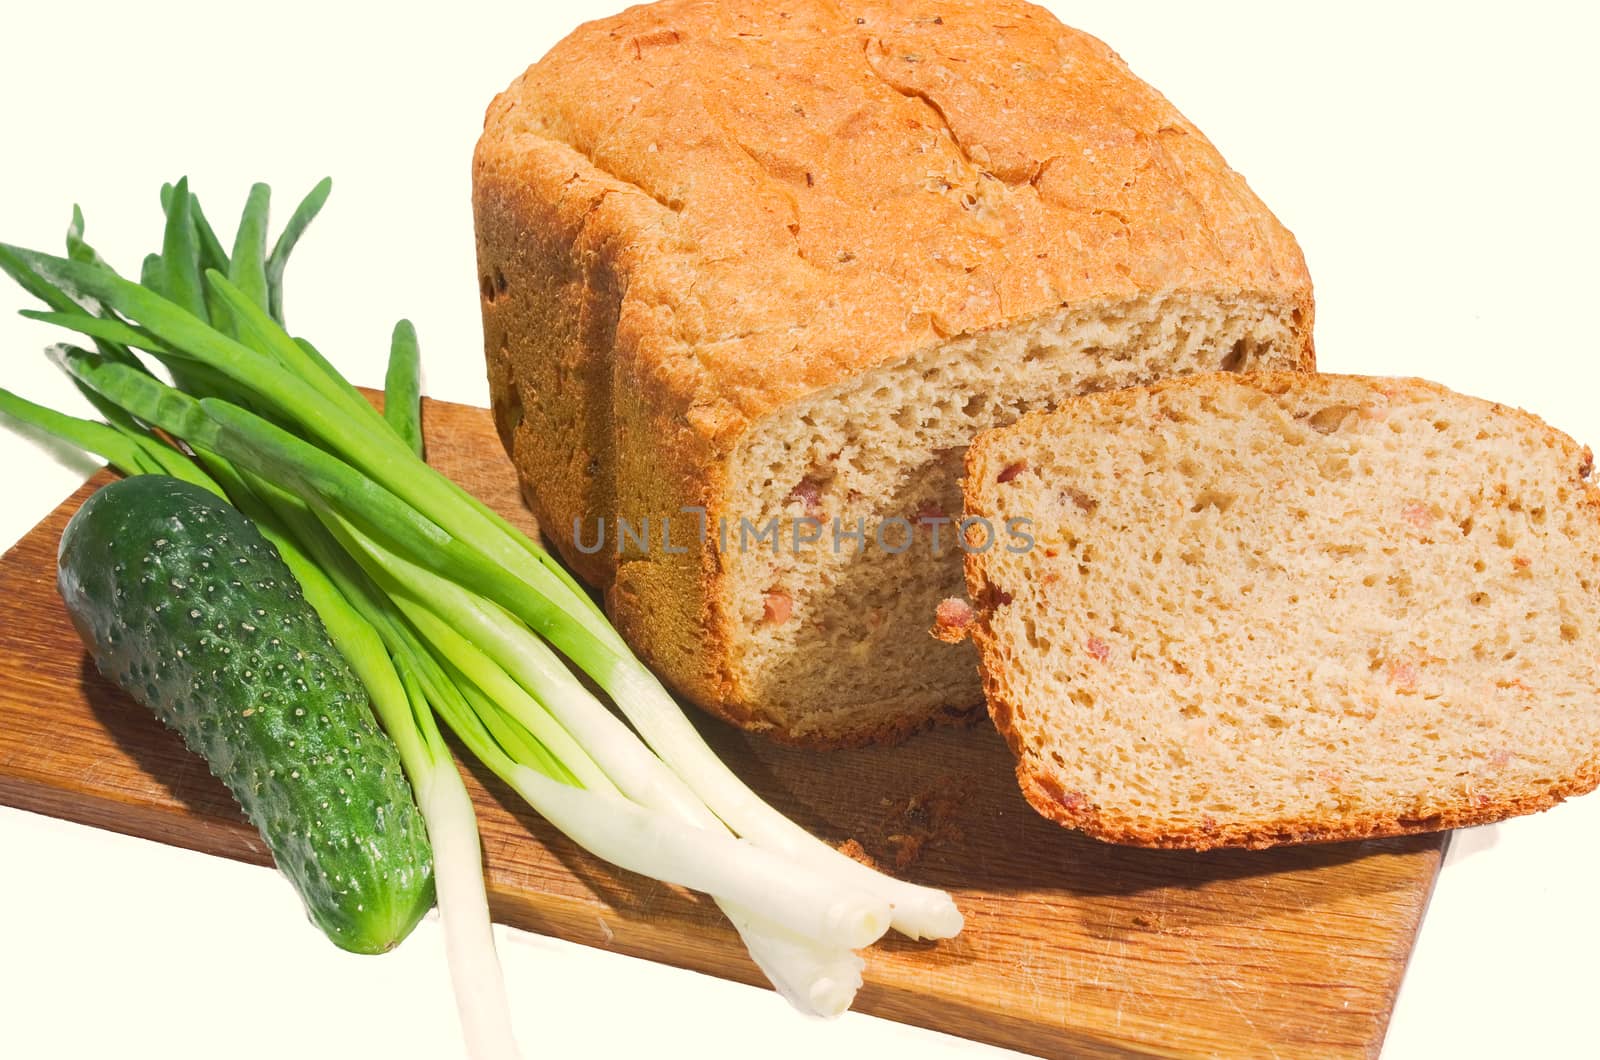 Freshly baked bread and vegetables on a white background